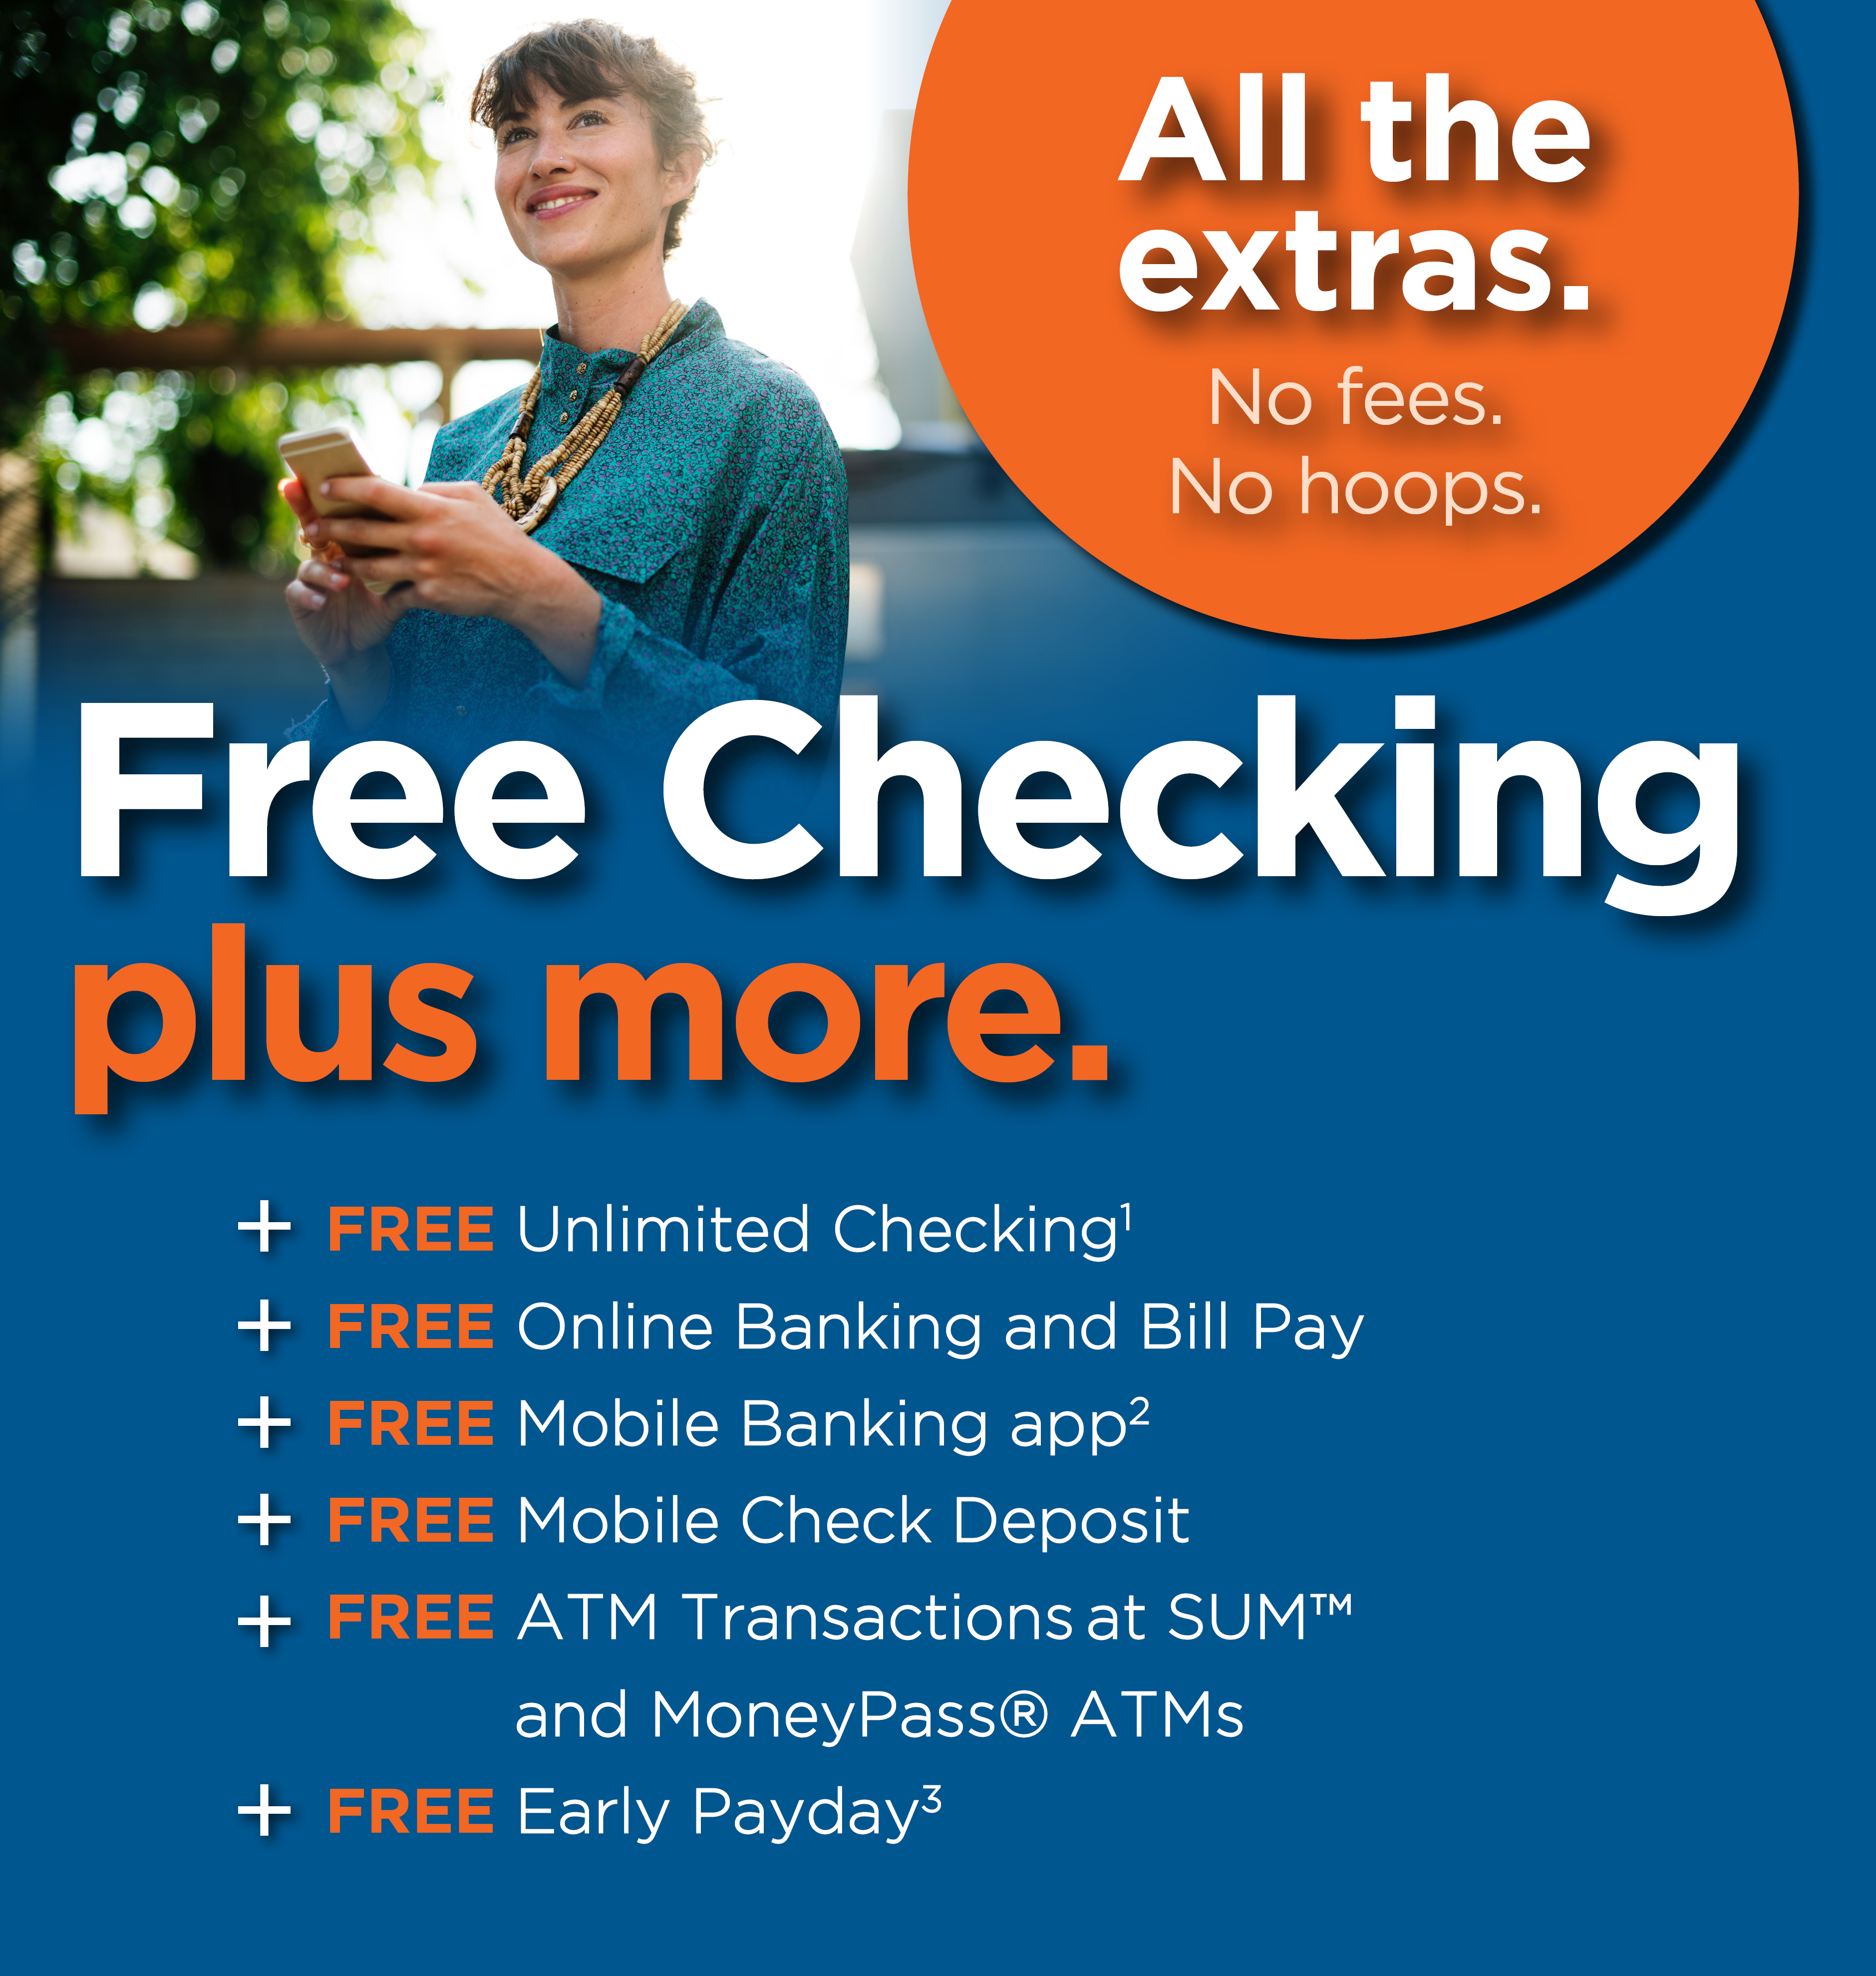 Free Checking plus more. All the extras with no fees and no hoops. Plus FREE Unlimited Checking. Superscript 1. Disclosure in footer. Plus FREE Online Banking and Bill Pay. Plus FREE Mobile Banking app. Superscript 2. Disclosure in footer. Plus FREE Mobile Check Deposit. Plus FREE ATM Transactions at SUM™ and MoneyPass® ATMs. Plus FREE Early Payday. Superscript 3. Disclosure in footer.